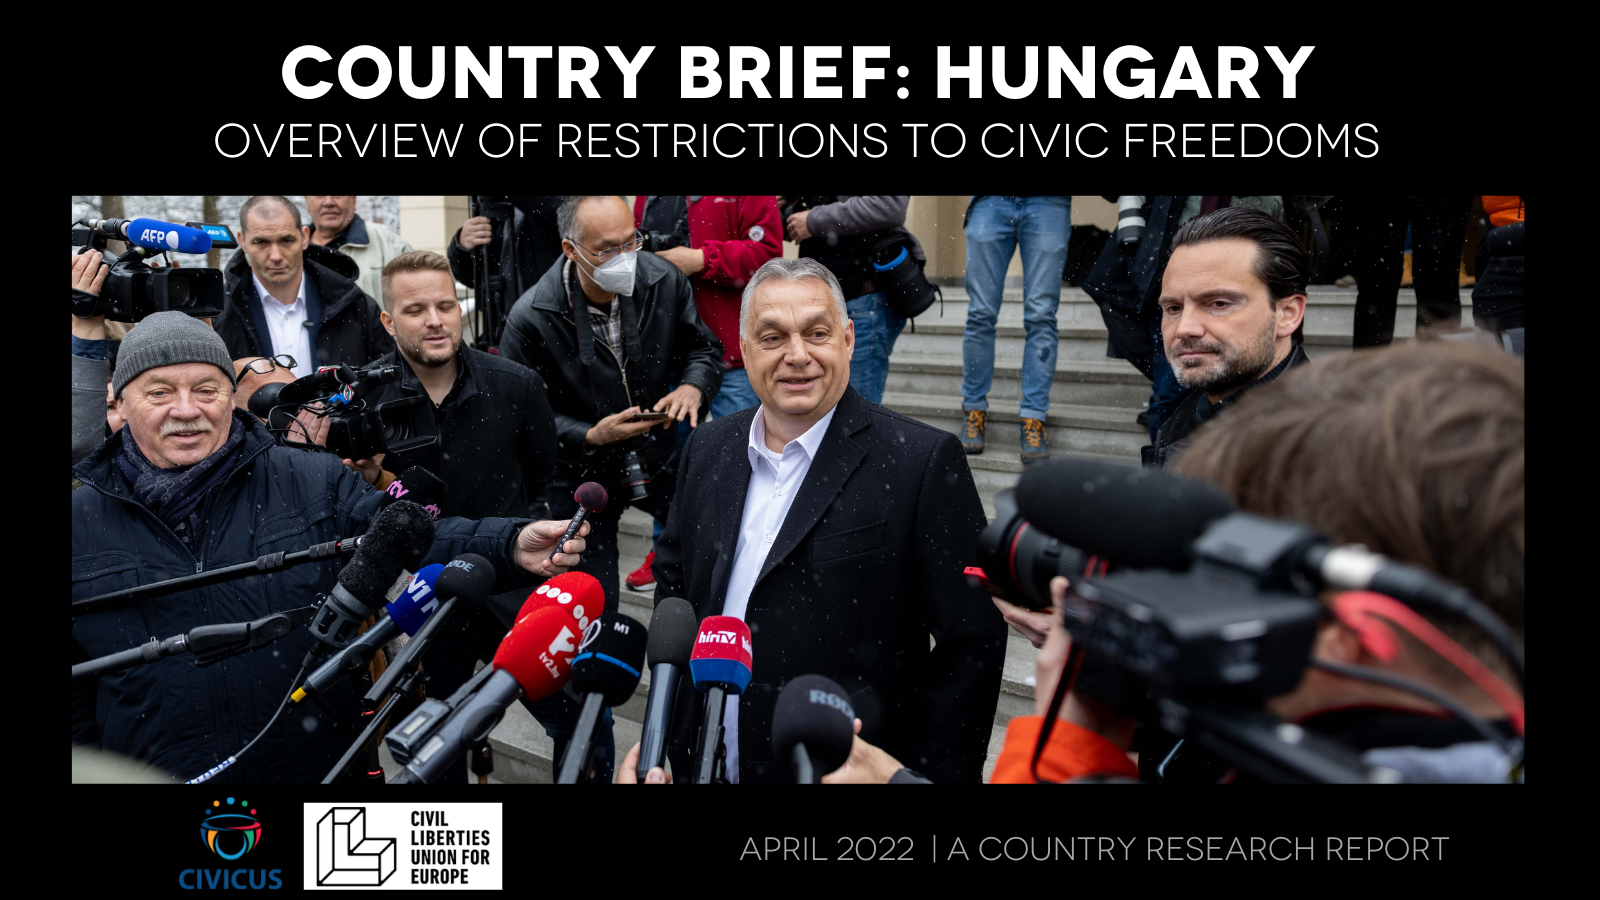 Hungary: Orbán and Fidesz party election victory spells further concerns for civic freedoms 